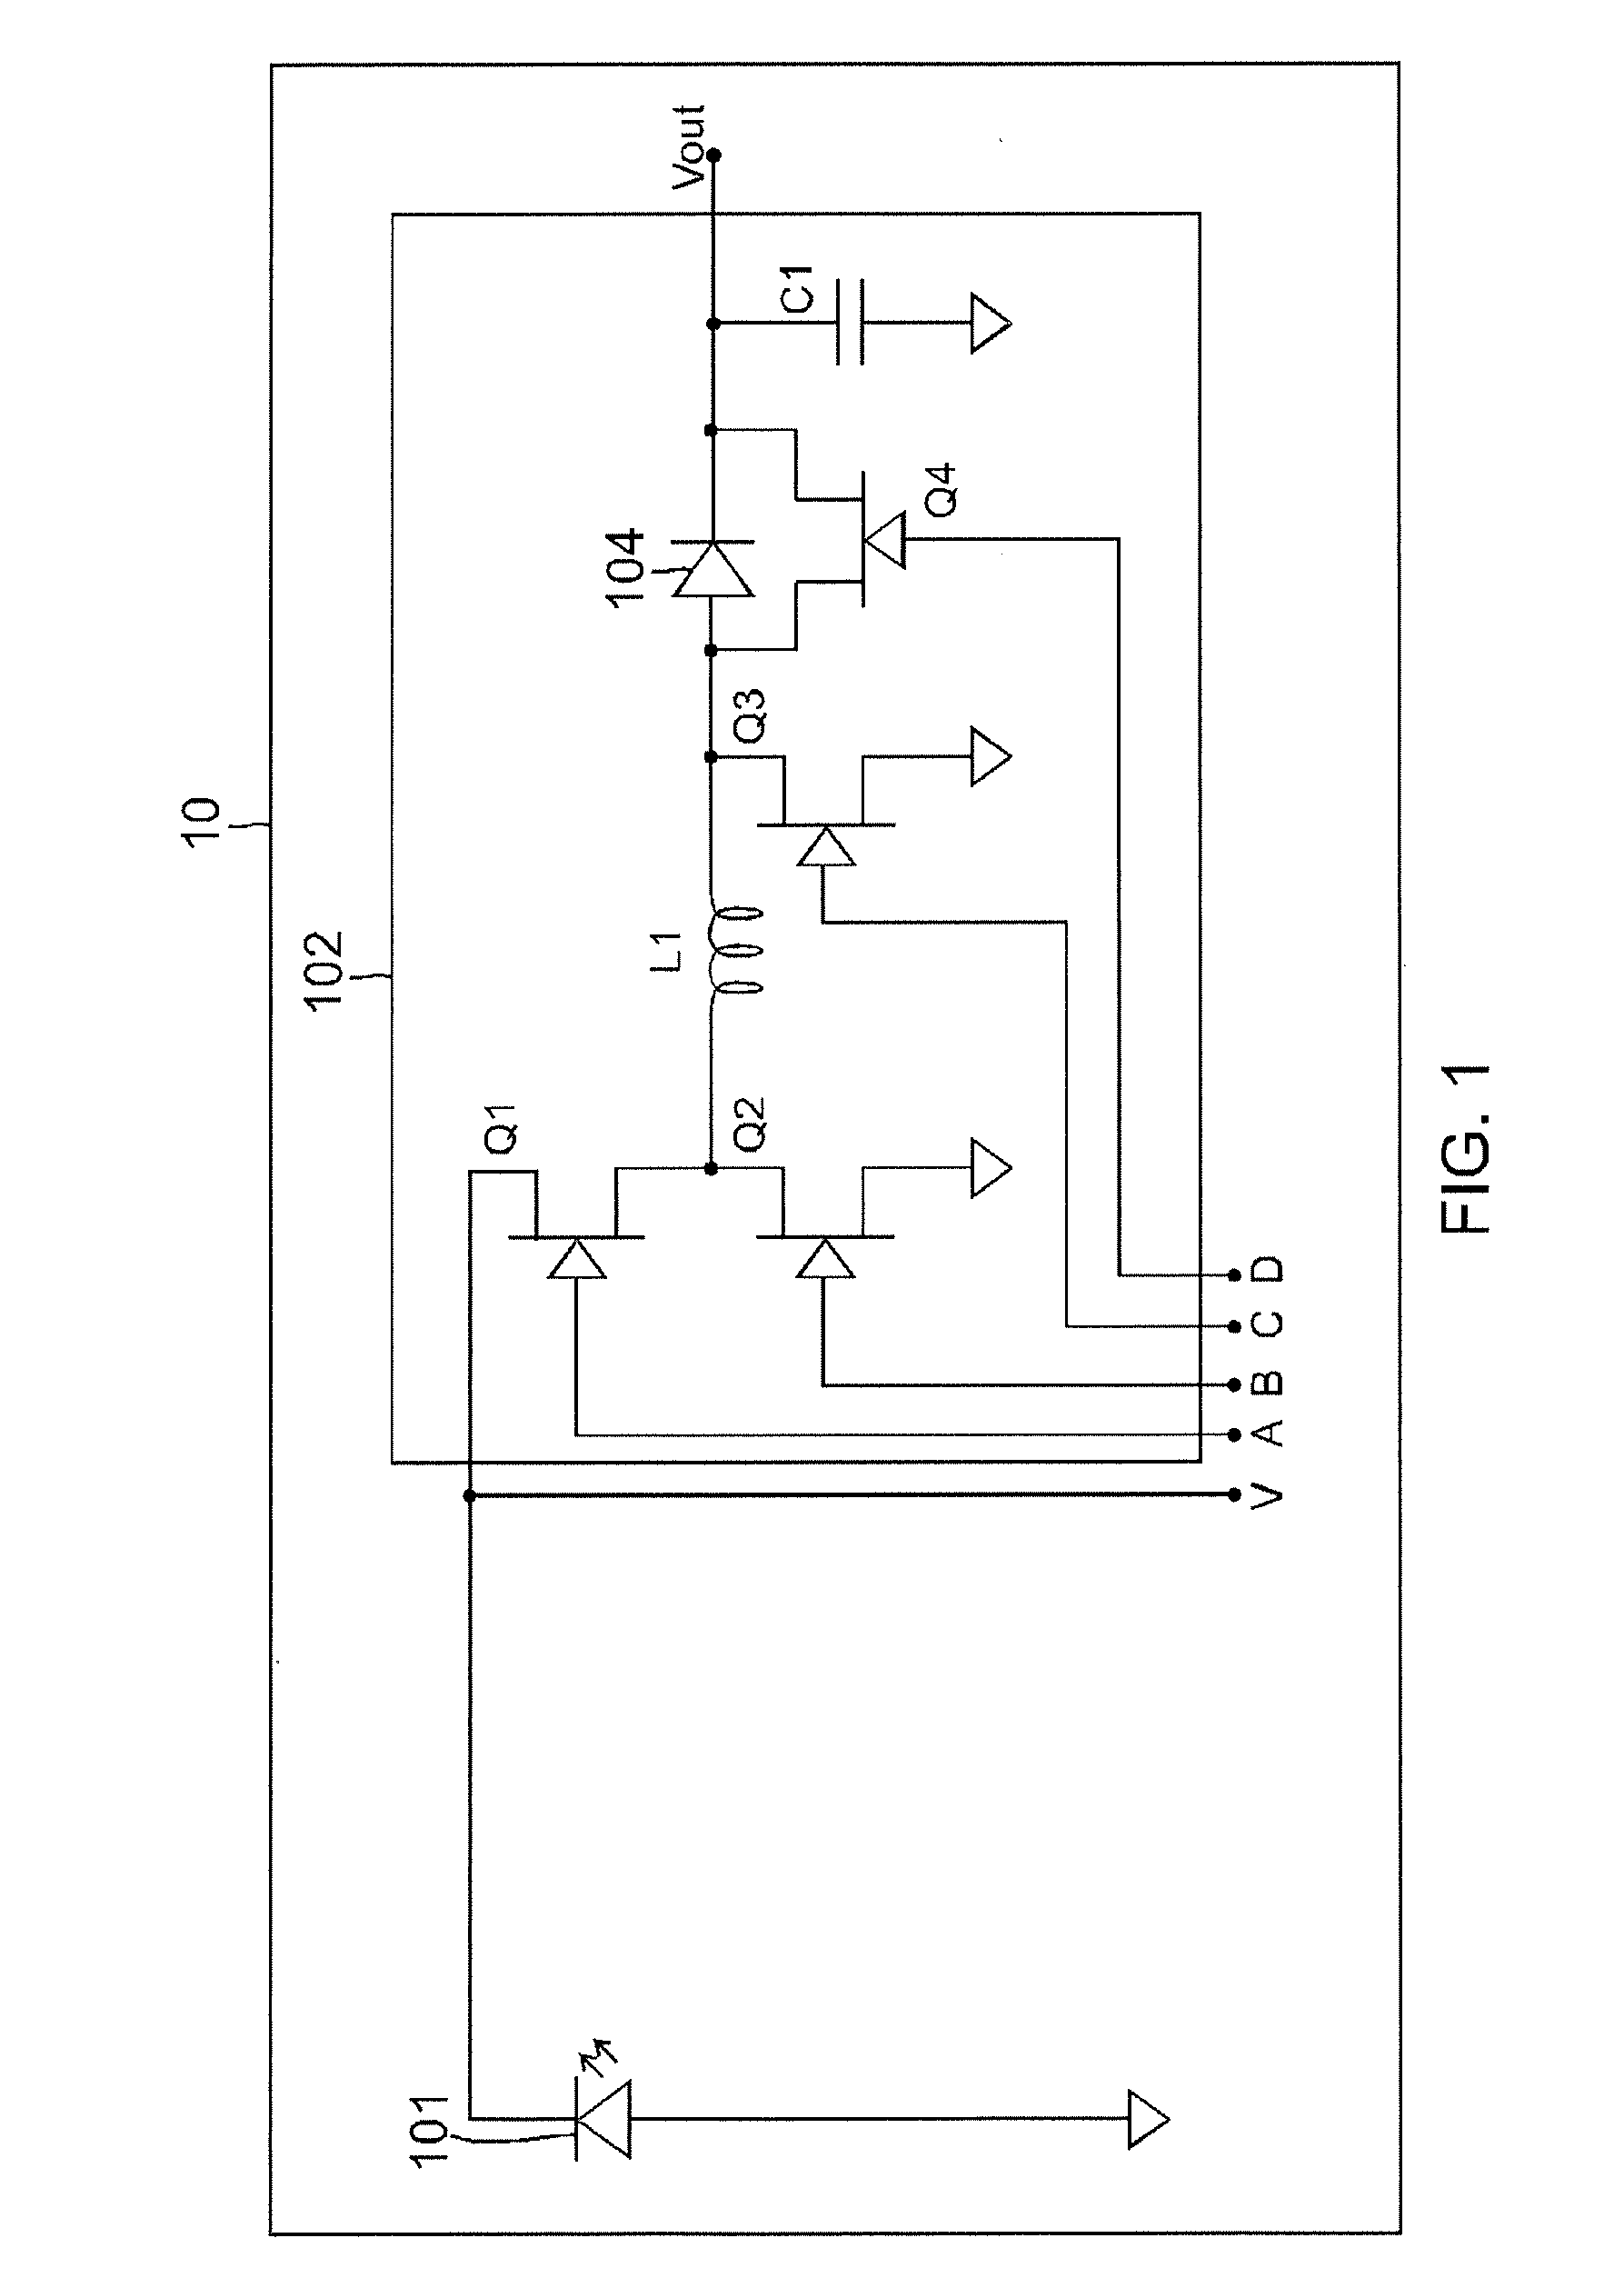 MONOLITHIC InGaN SOLAR CELL POWER GENERATION WITH INTEGRATED EFFICIENT SWITCHING DC-DC VOLTAGE CONVERTOR